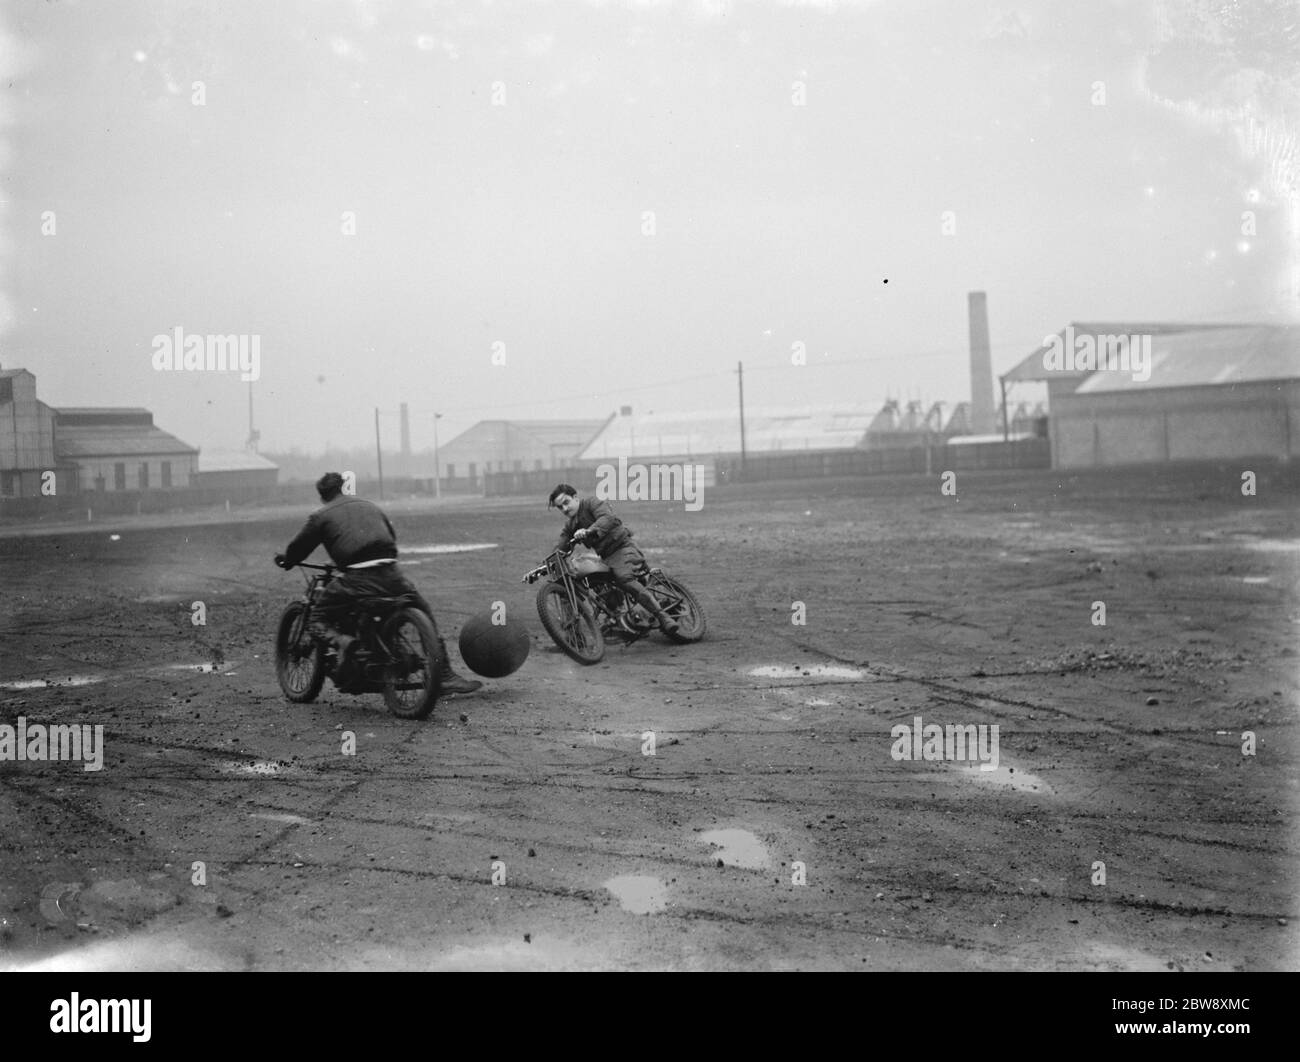 Football on motorcycles at Hackney Wick Stadium in London . Here are the rider during practice . 1937 Stock Photo